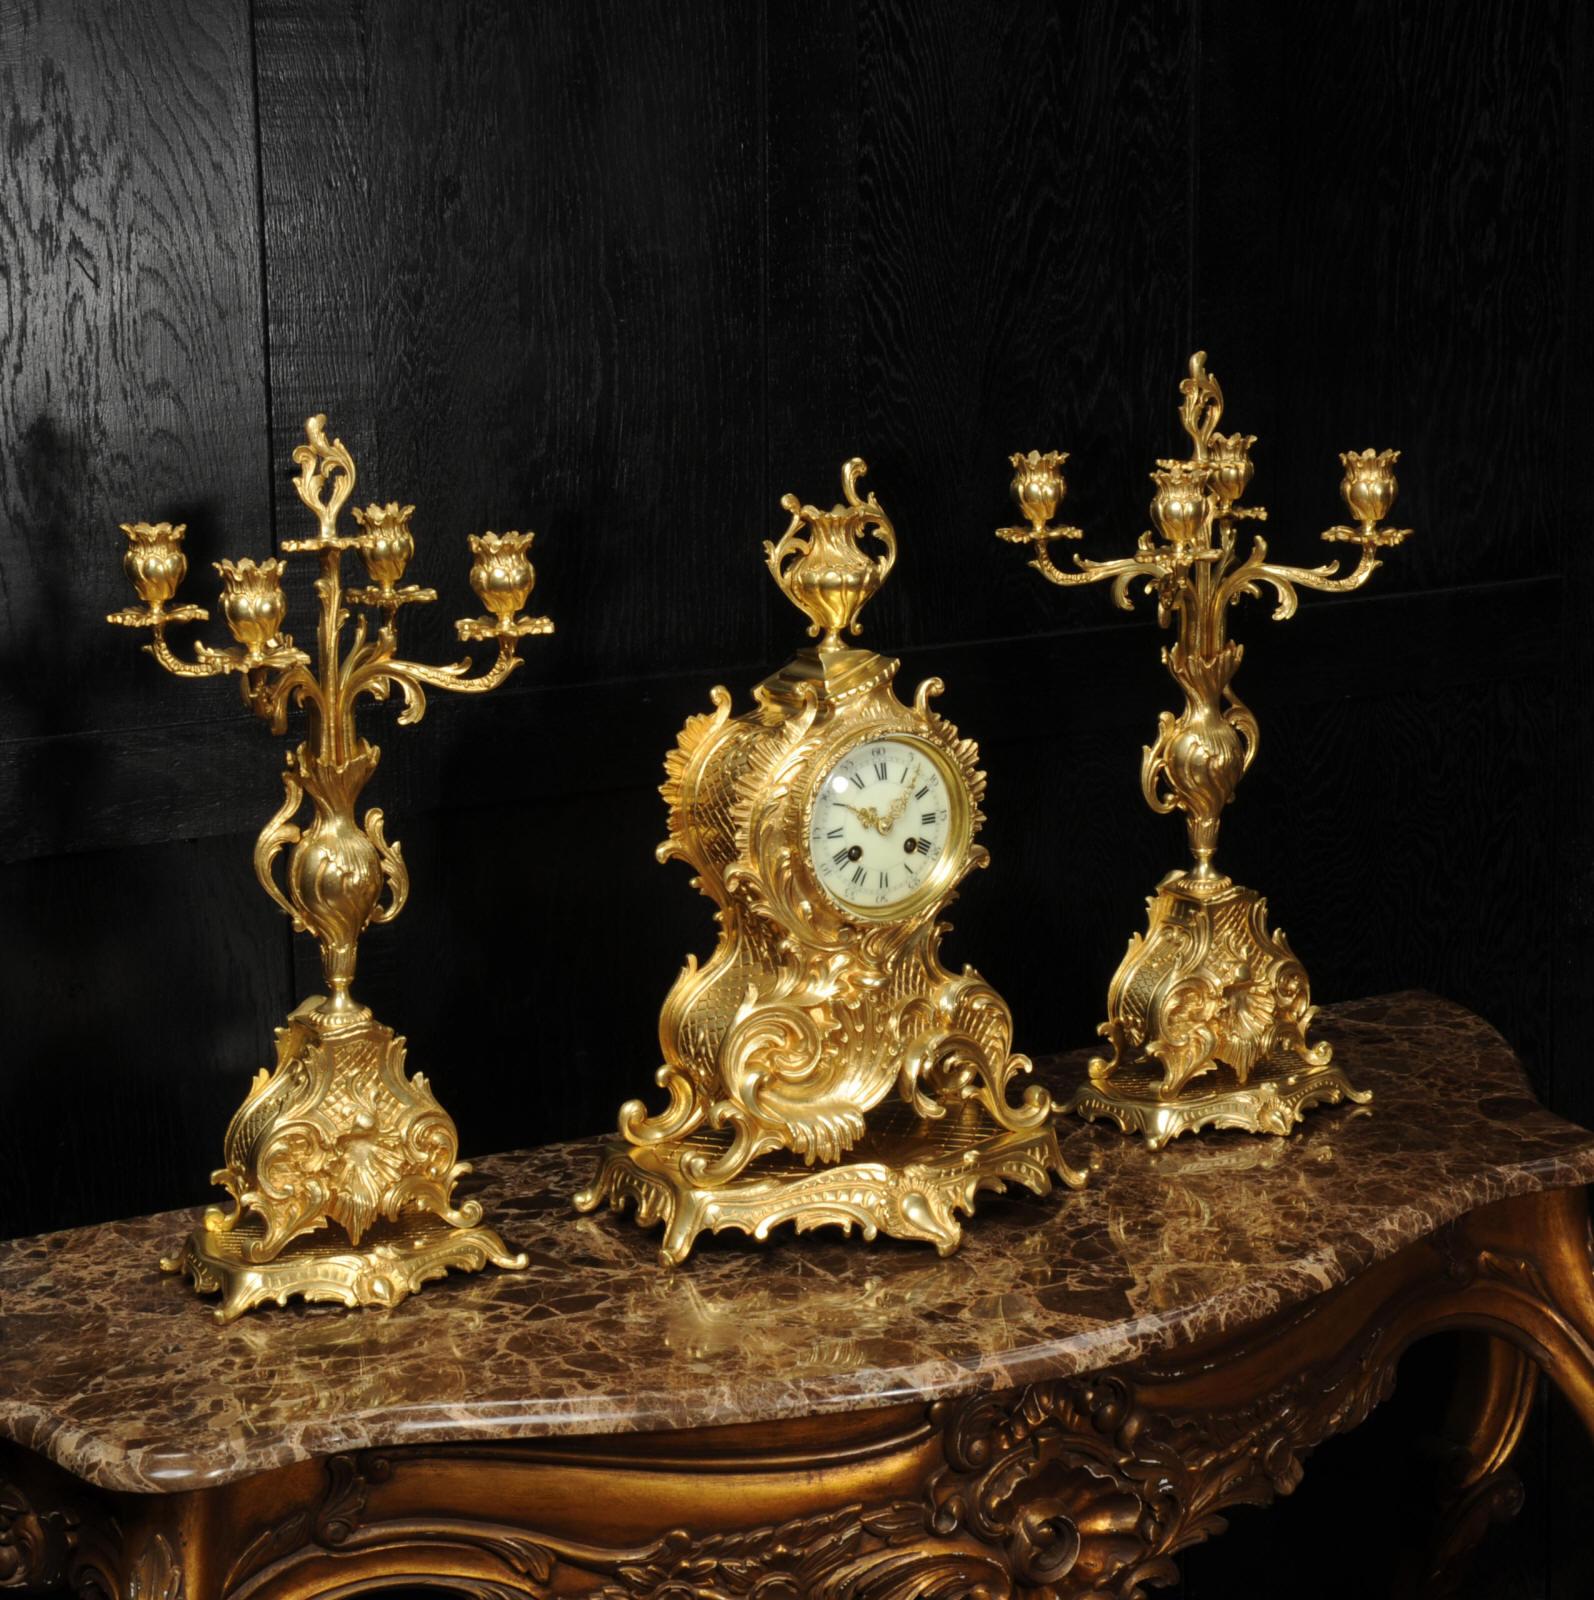 Large Antique French Rococo Gilt Bronze Candelabra Clock Set In Good Condition For Sale In Belper, Derbyshire